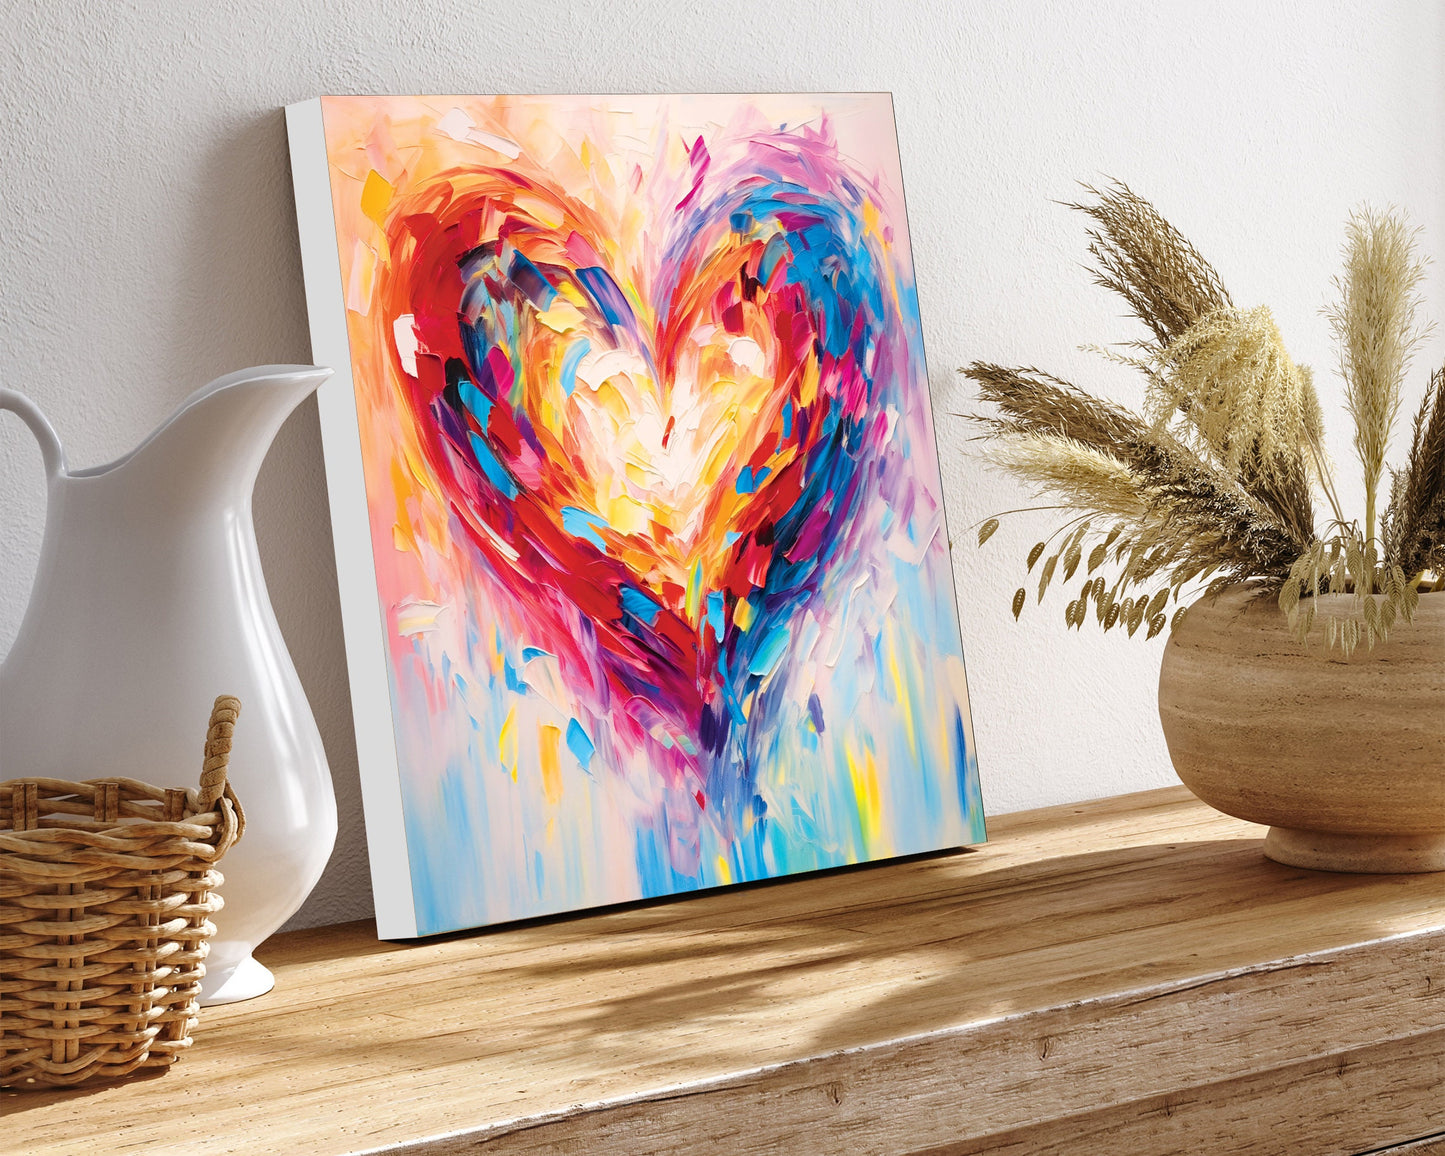 12in Oil Painting Style of a Colorful Heart Valentine__ Day Canvas UV Print Wall Art, Wall Canvas Printing, Living Room Decor | Mantle